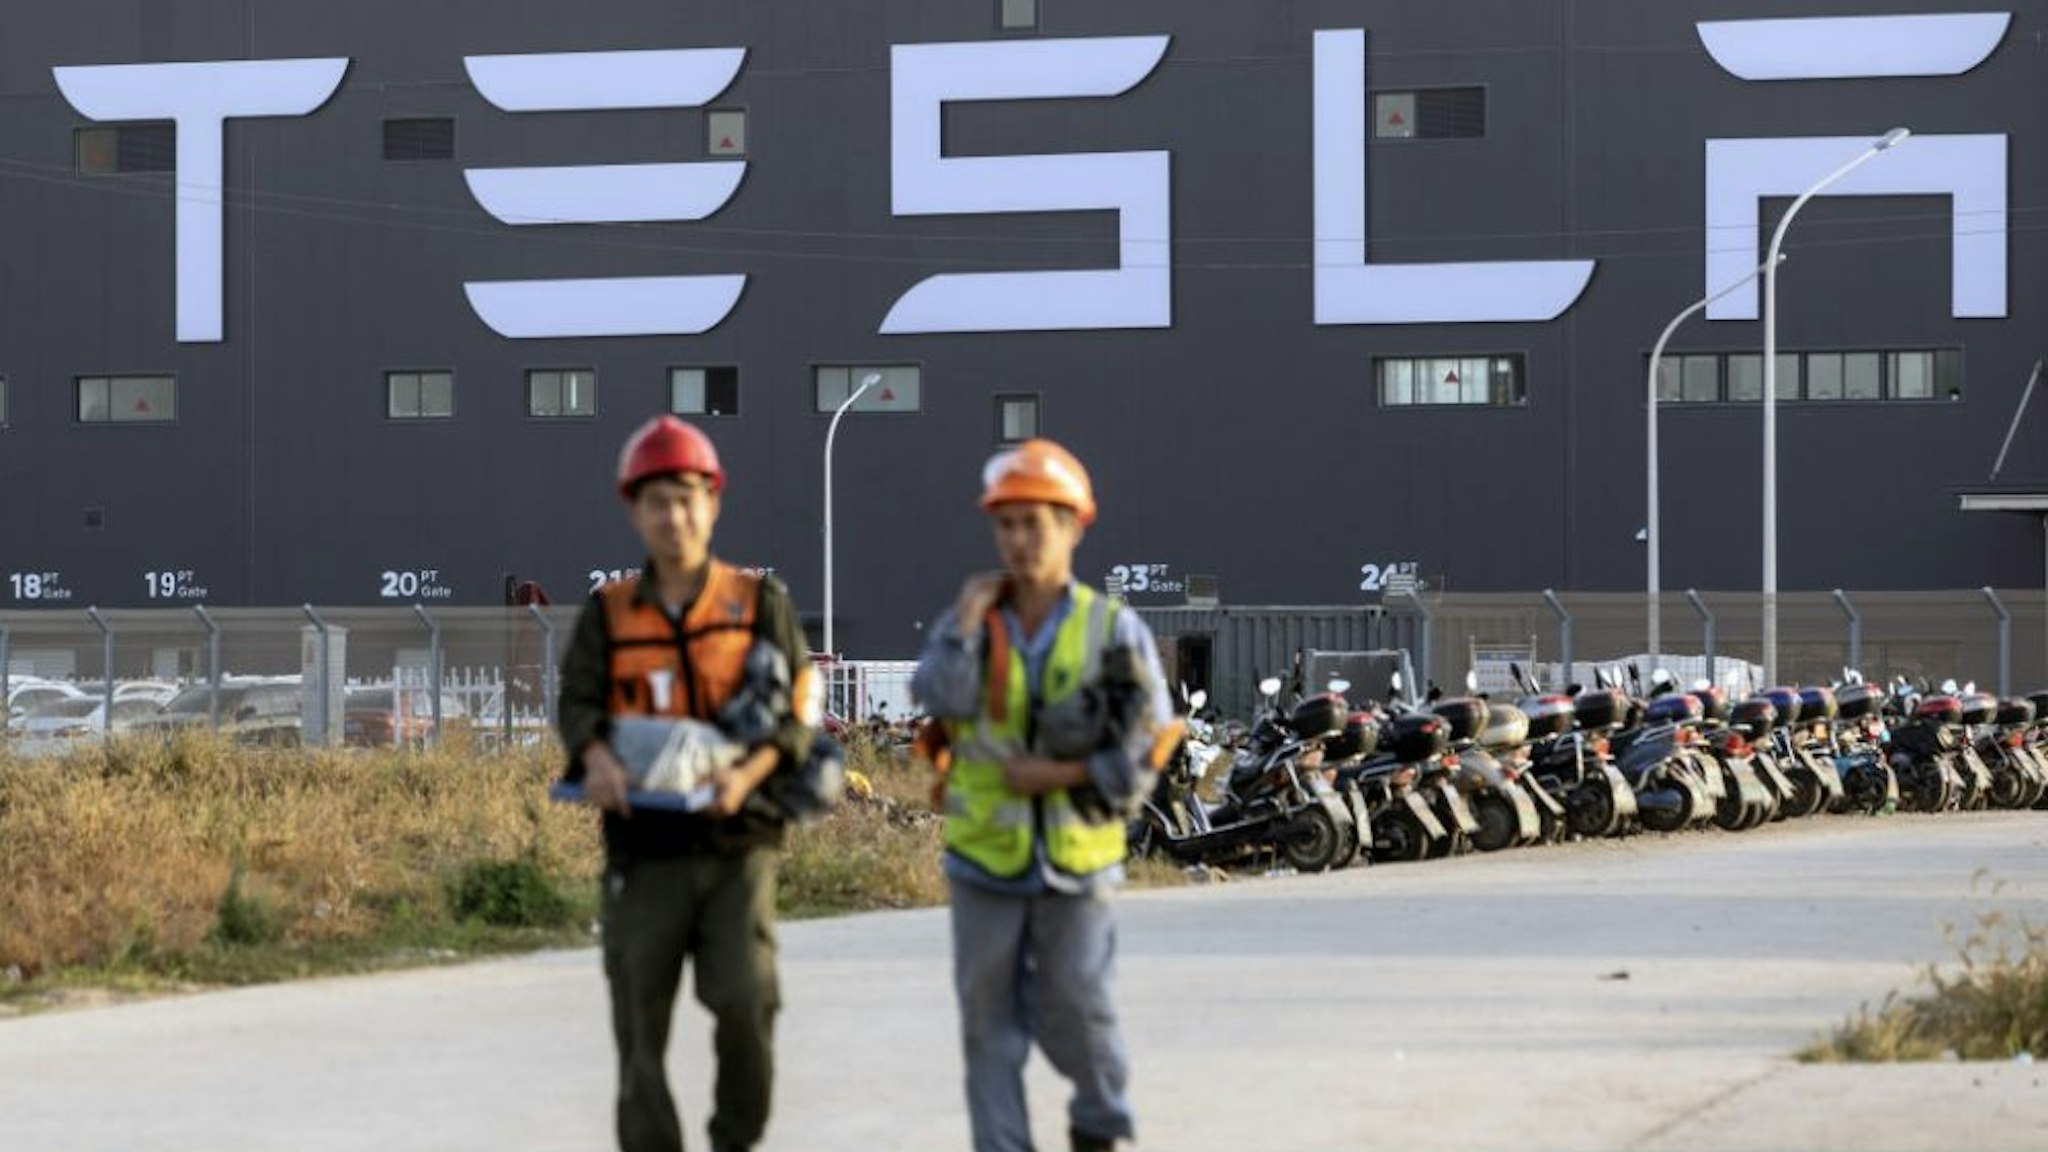 Workers walk outside the Tesla Inc. Gigafactory in Shanghai, China, on Friday, Nov. 1, 2019. After starting construction this year, Teslas new factory is already producing electric vehicles on a trial basis.